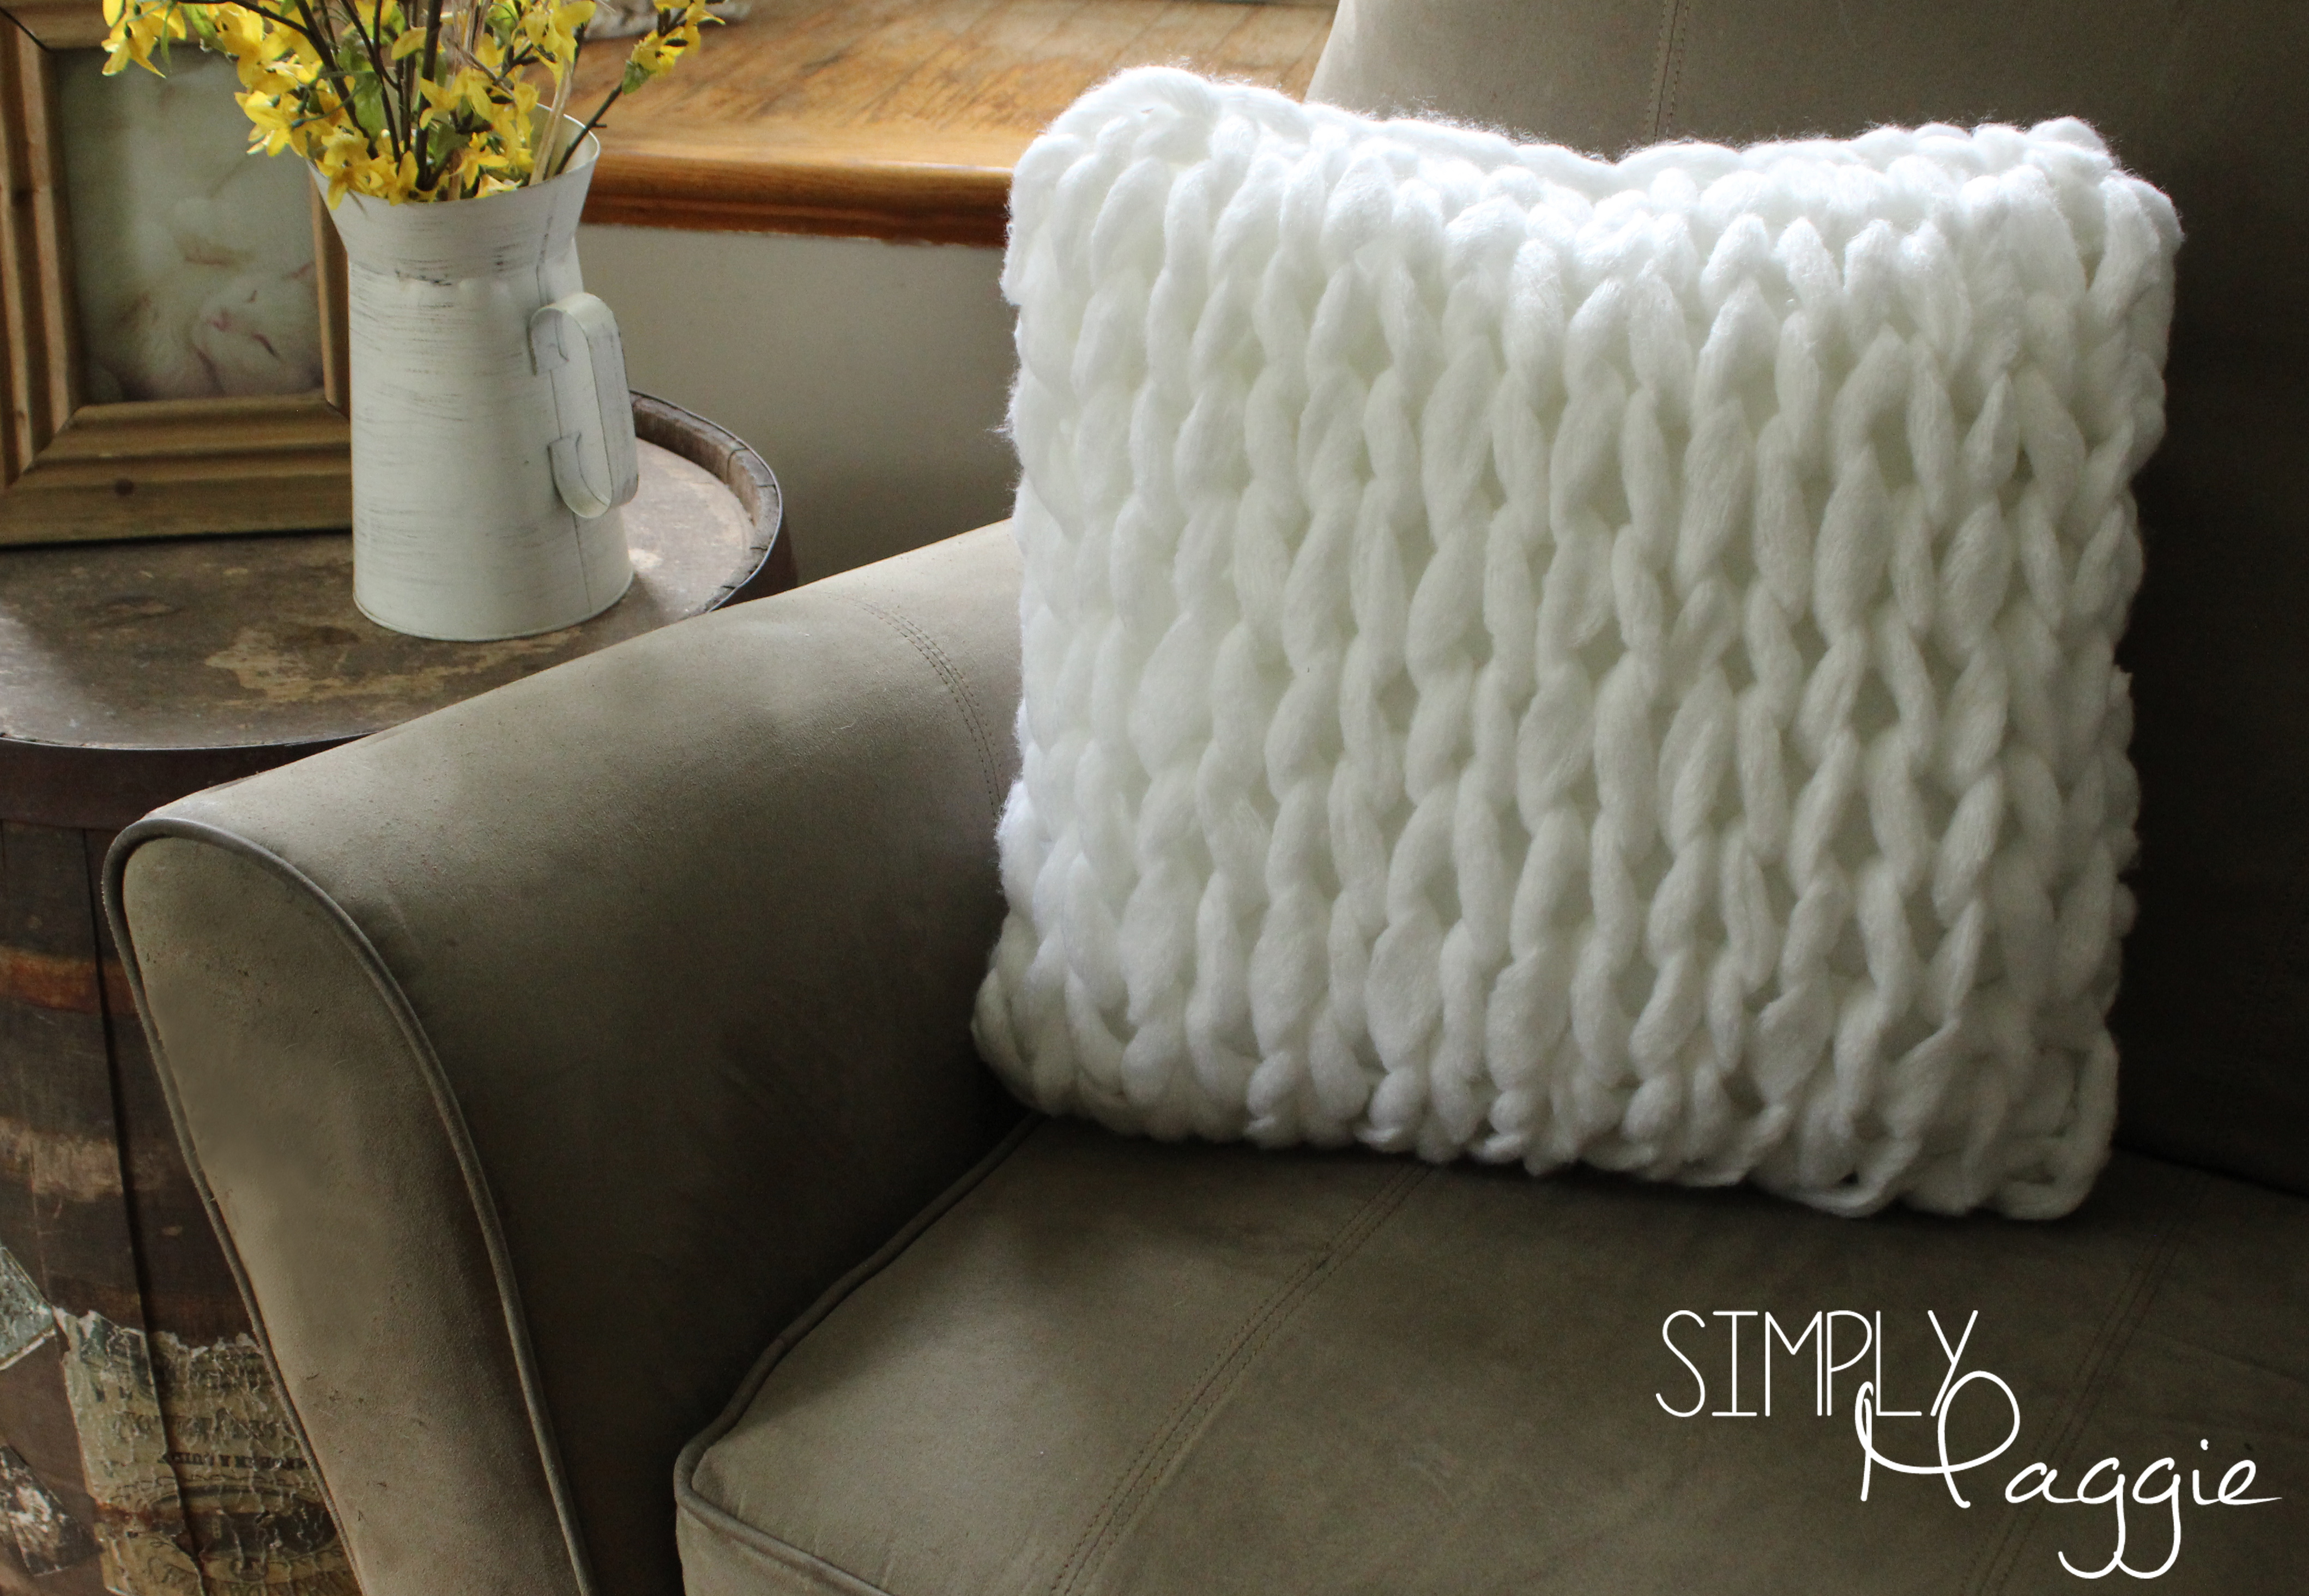 Free Cushion Cover Knitting Pattern One Hour Arm Knit Pillow Pattern Simply Maggie Simplymaggie